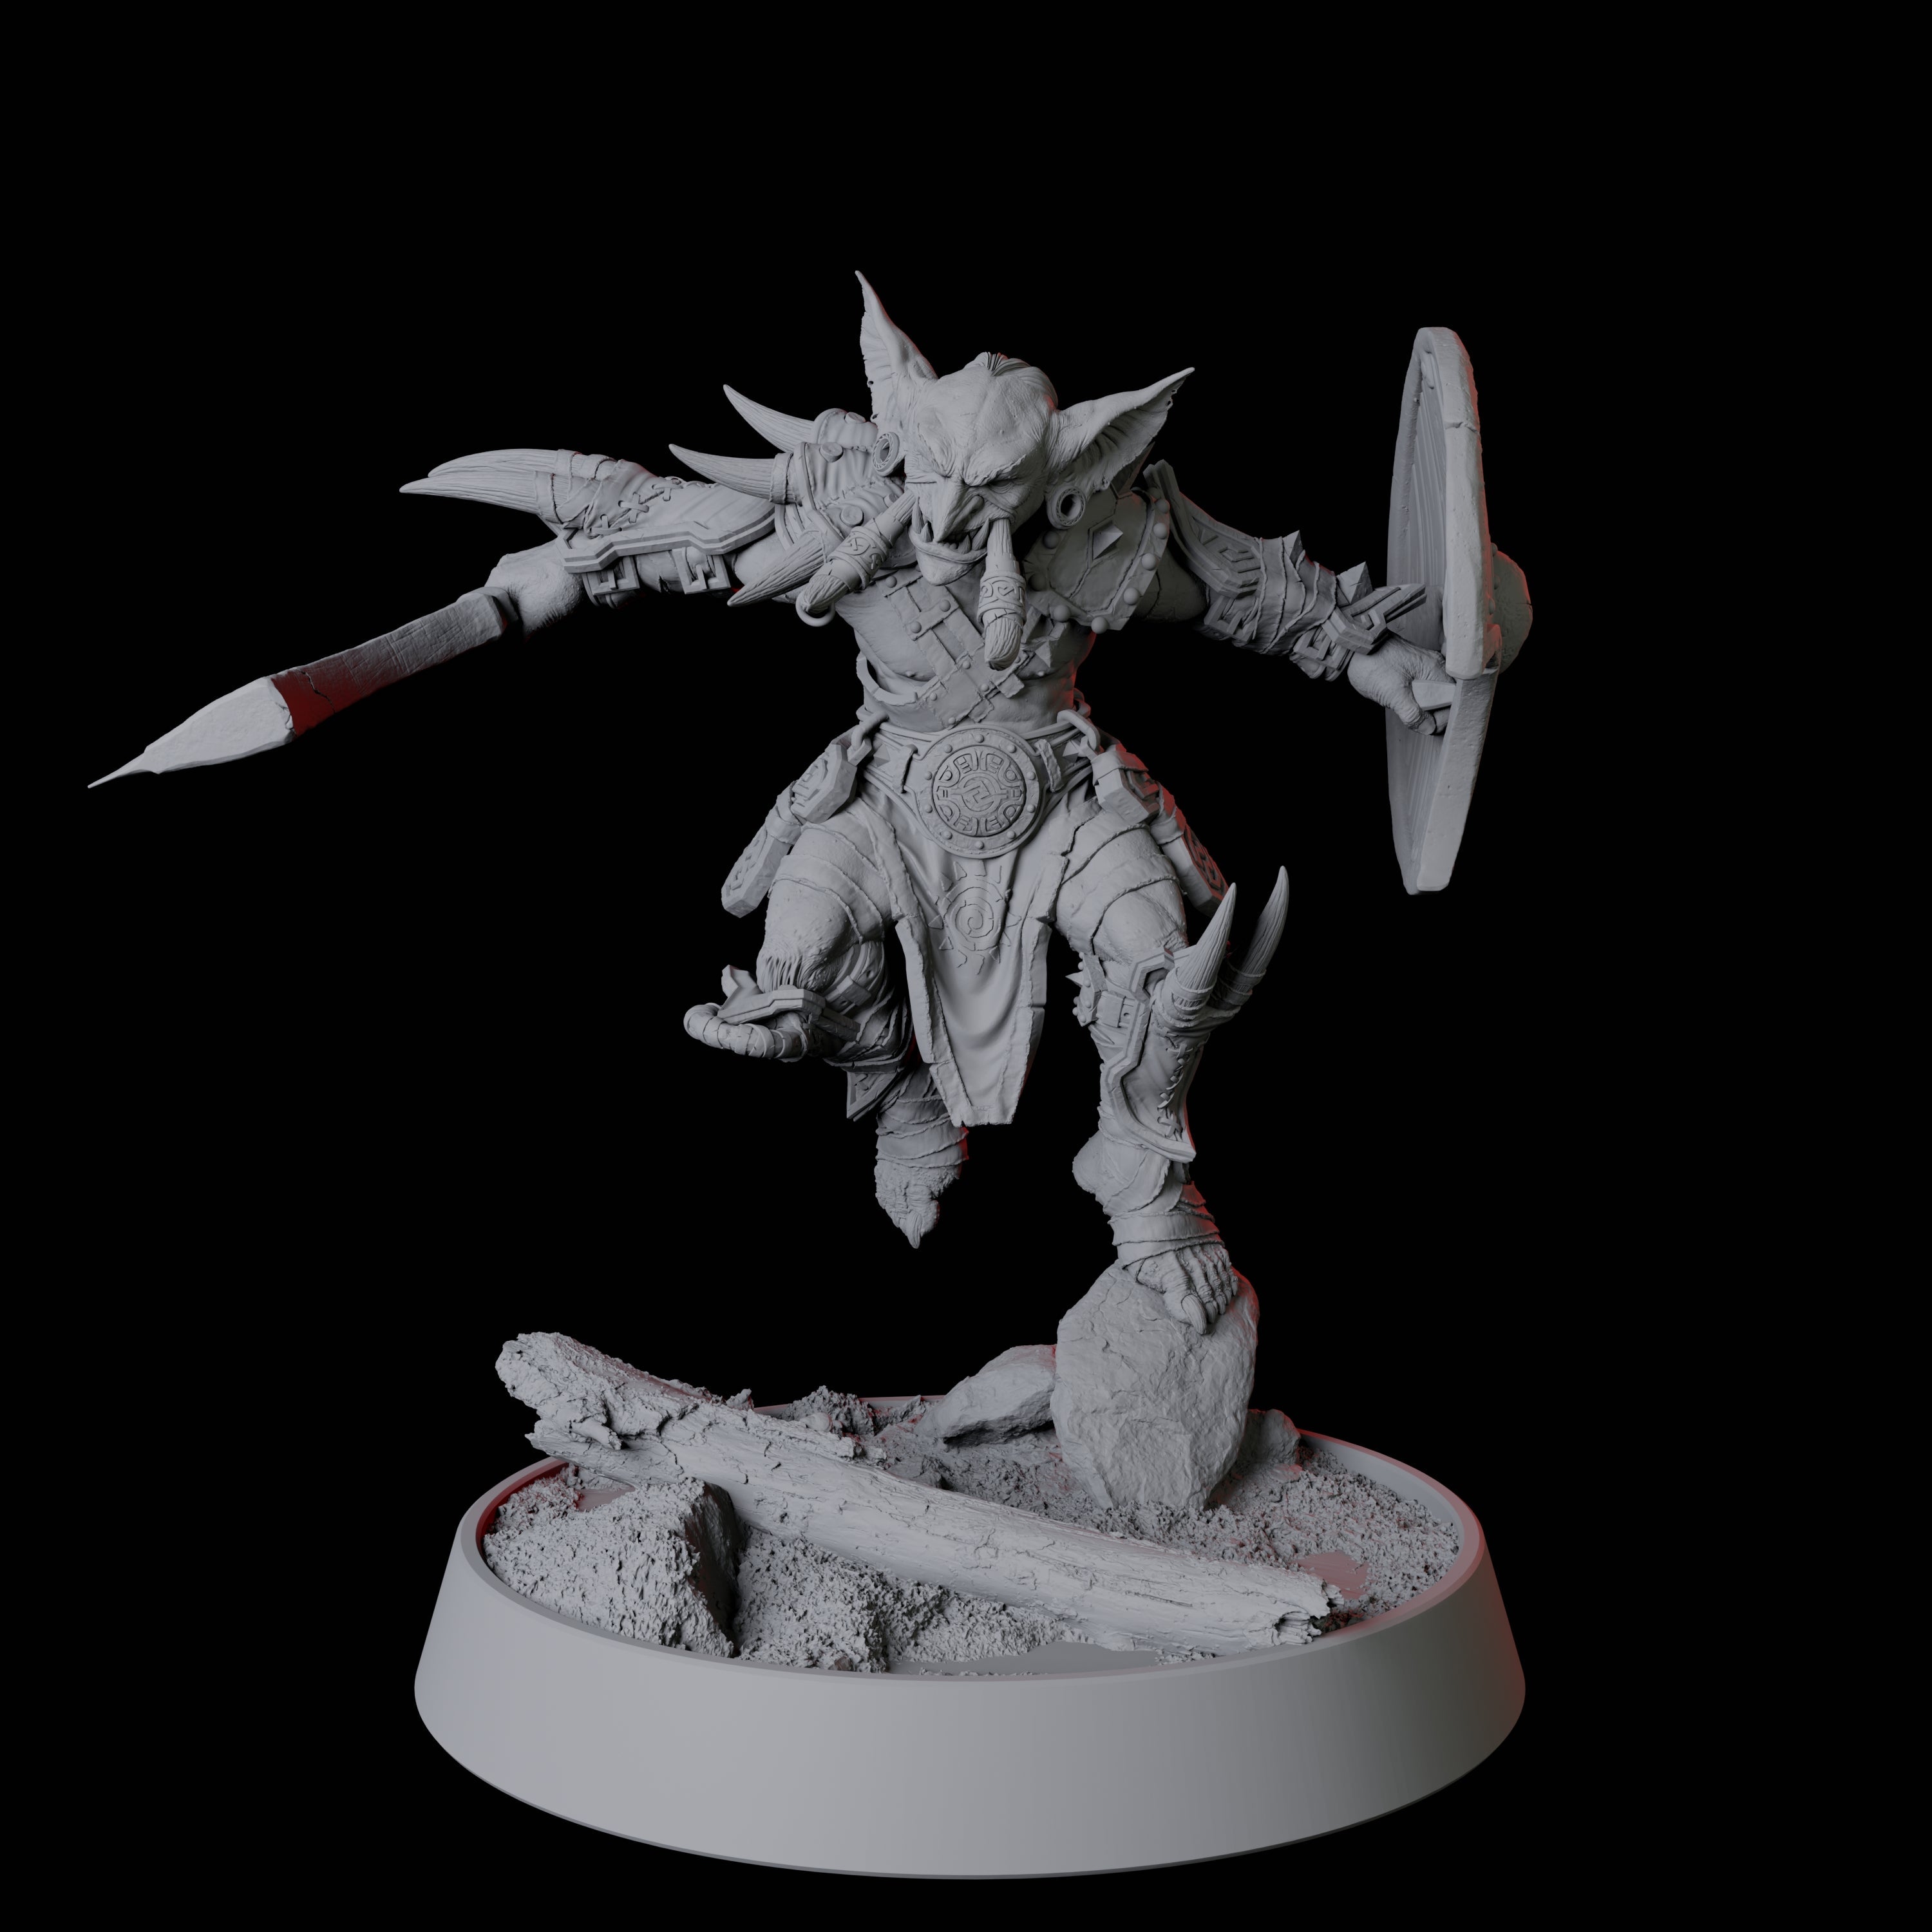 Leaping Goblin Spearman Miniature for Dungeons and Dragons